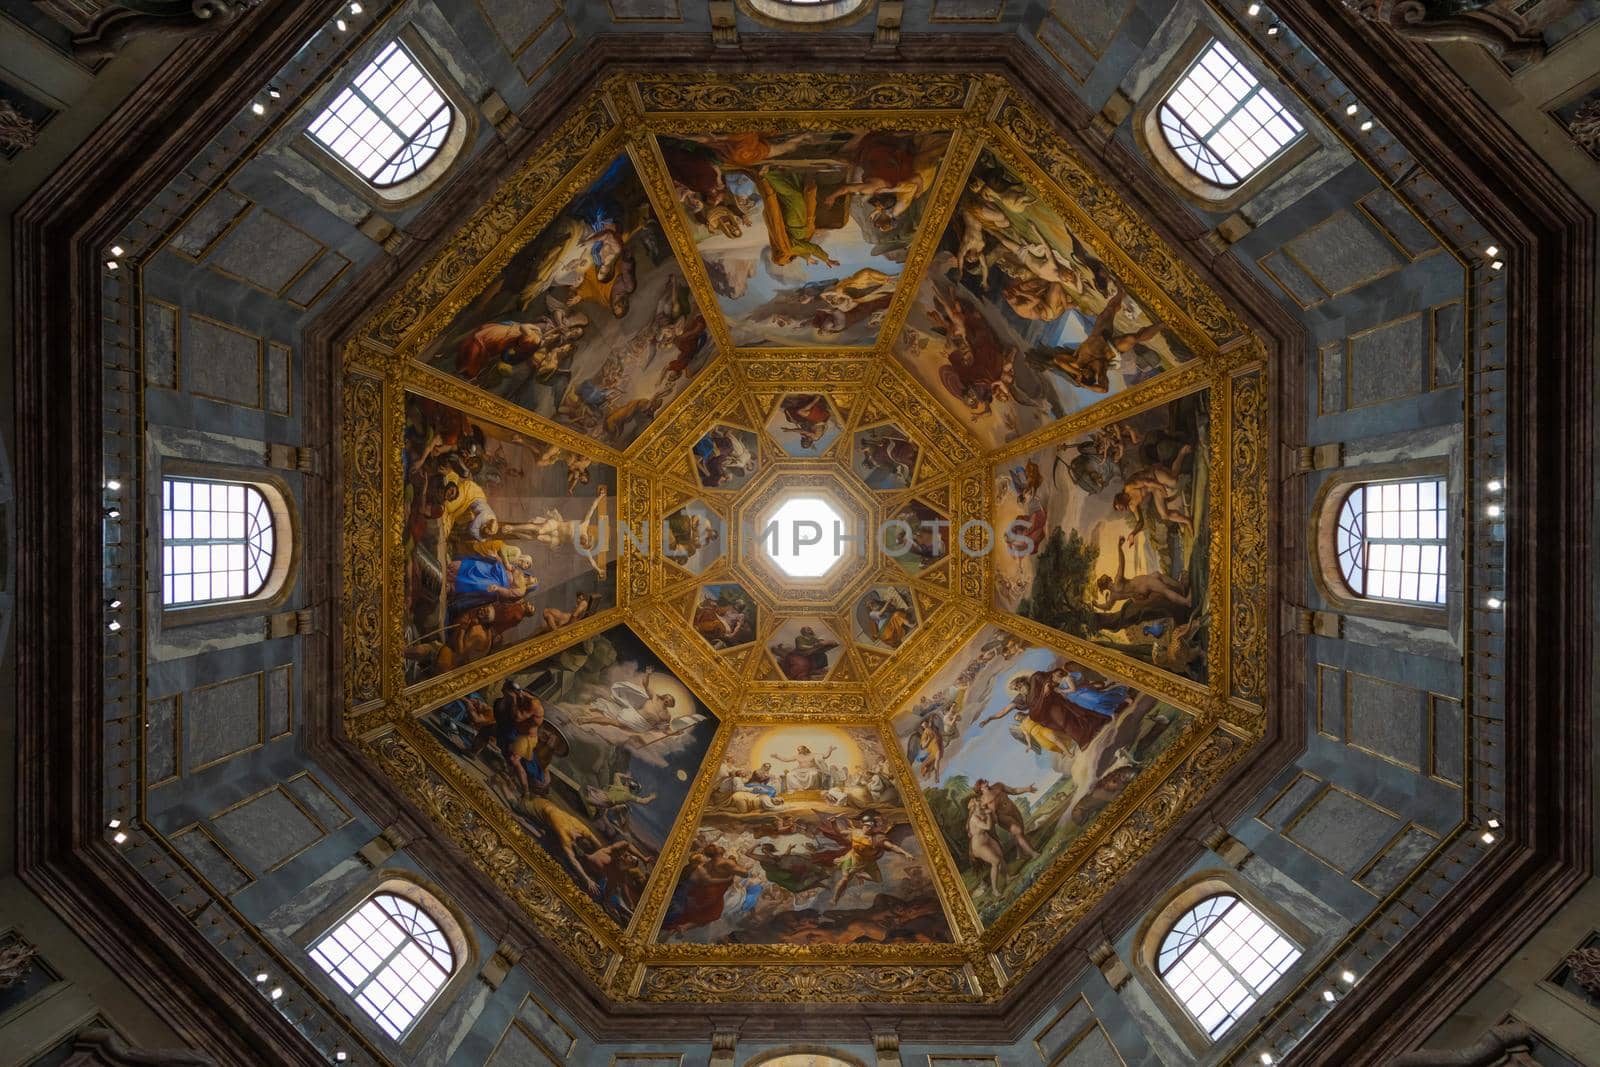 Medici Chapels interior - Cappelle Medicee. Michelangelo Renaissance art in Florence, Italy. by Perseomedusa